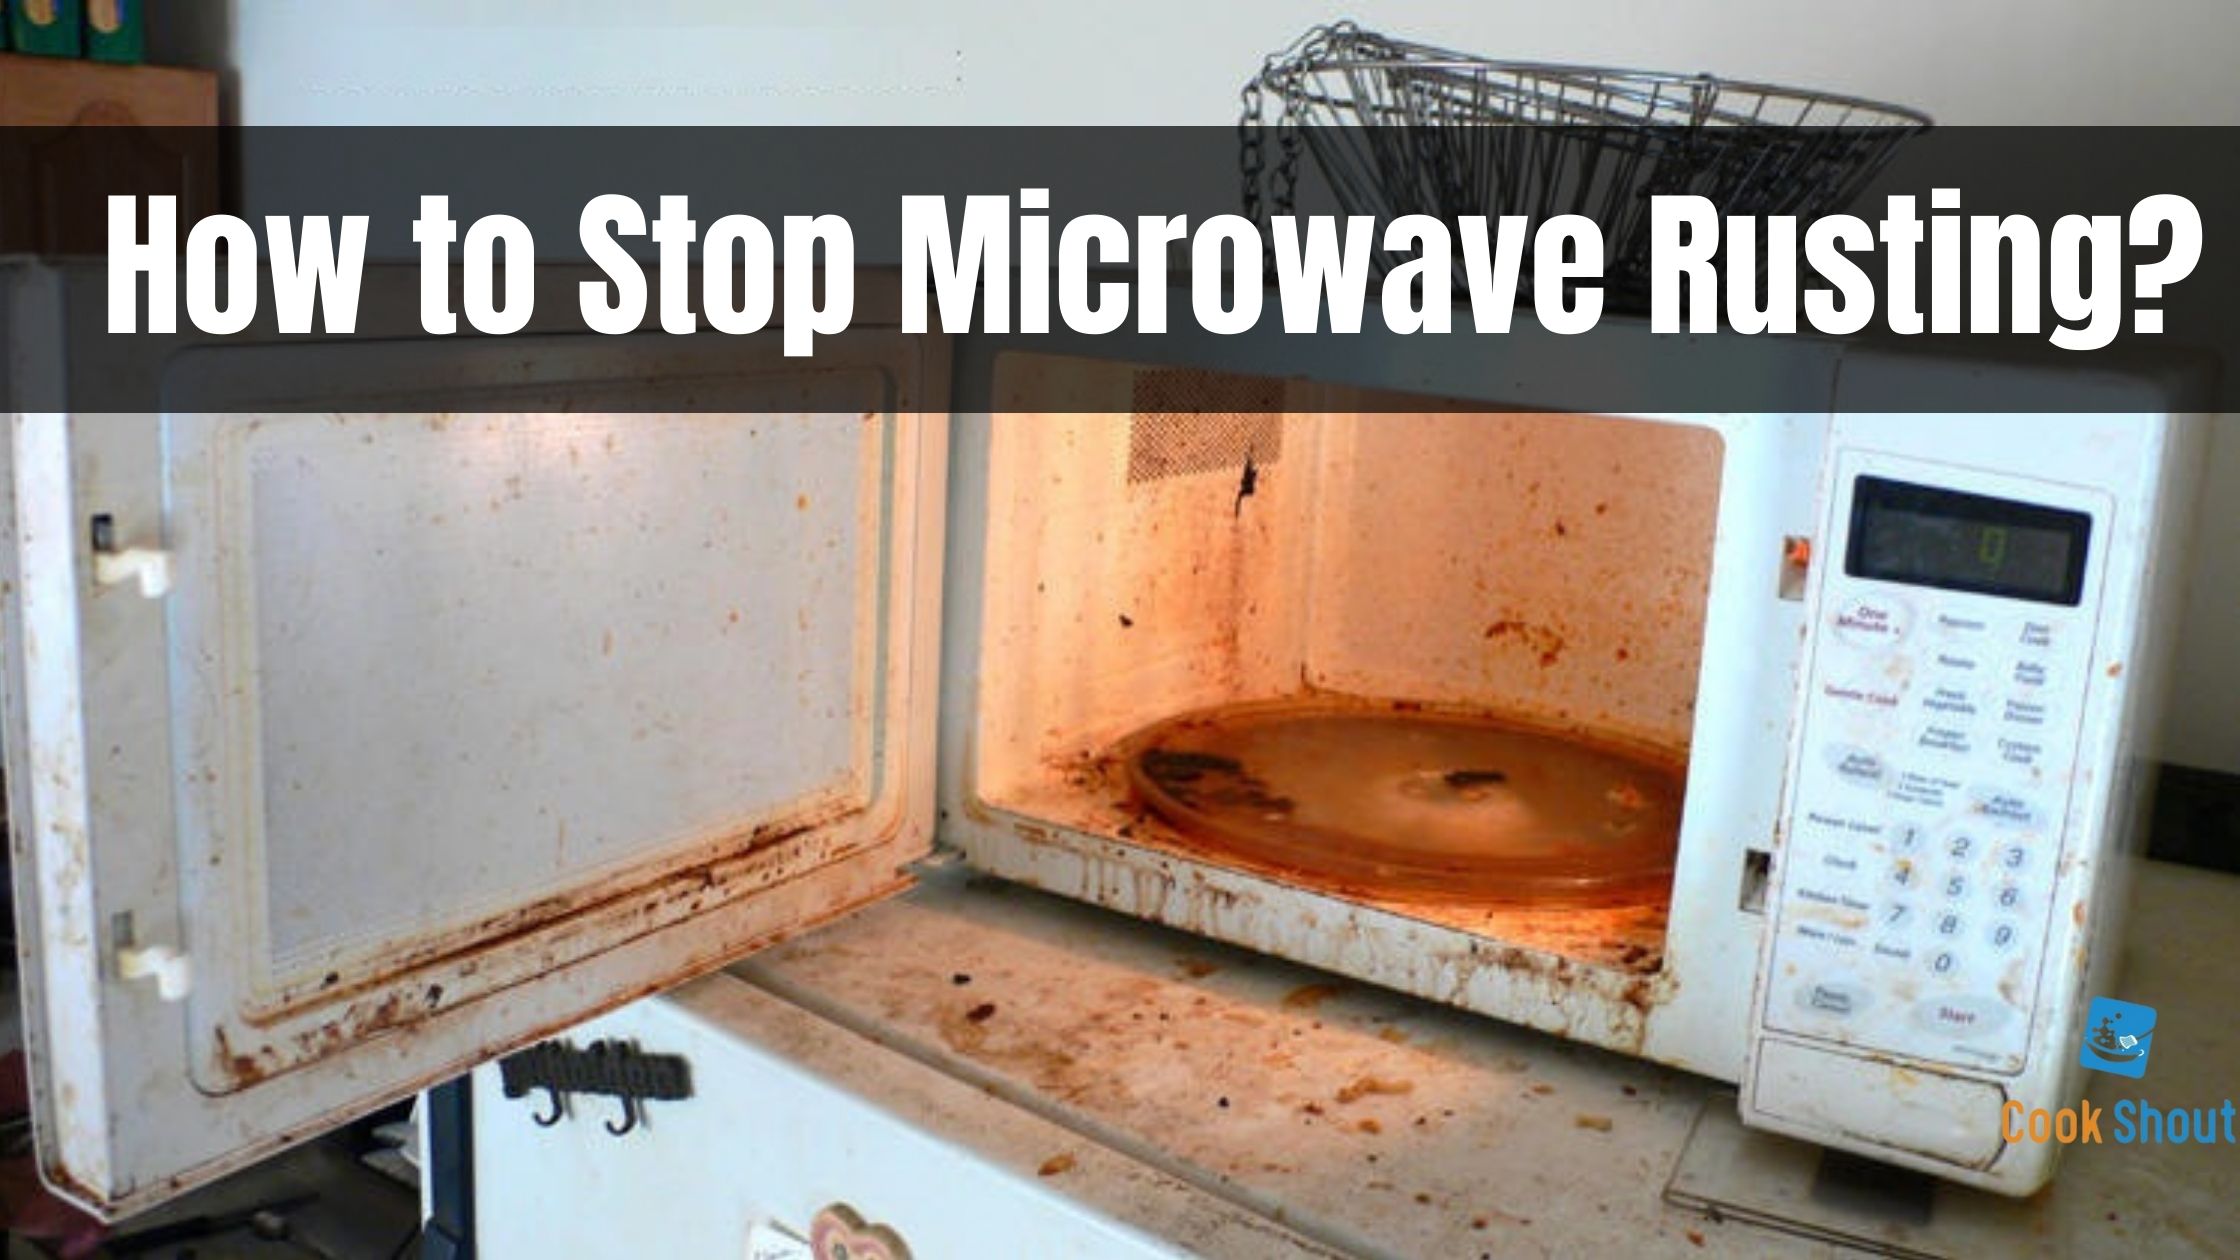 How to Stop Microwave Rusting